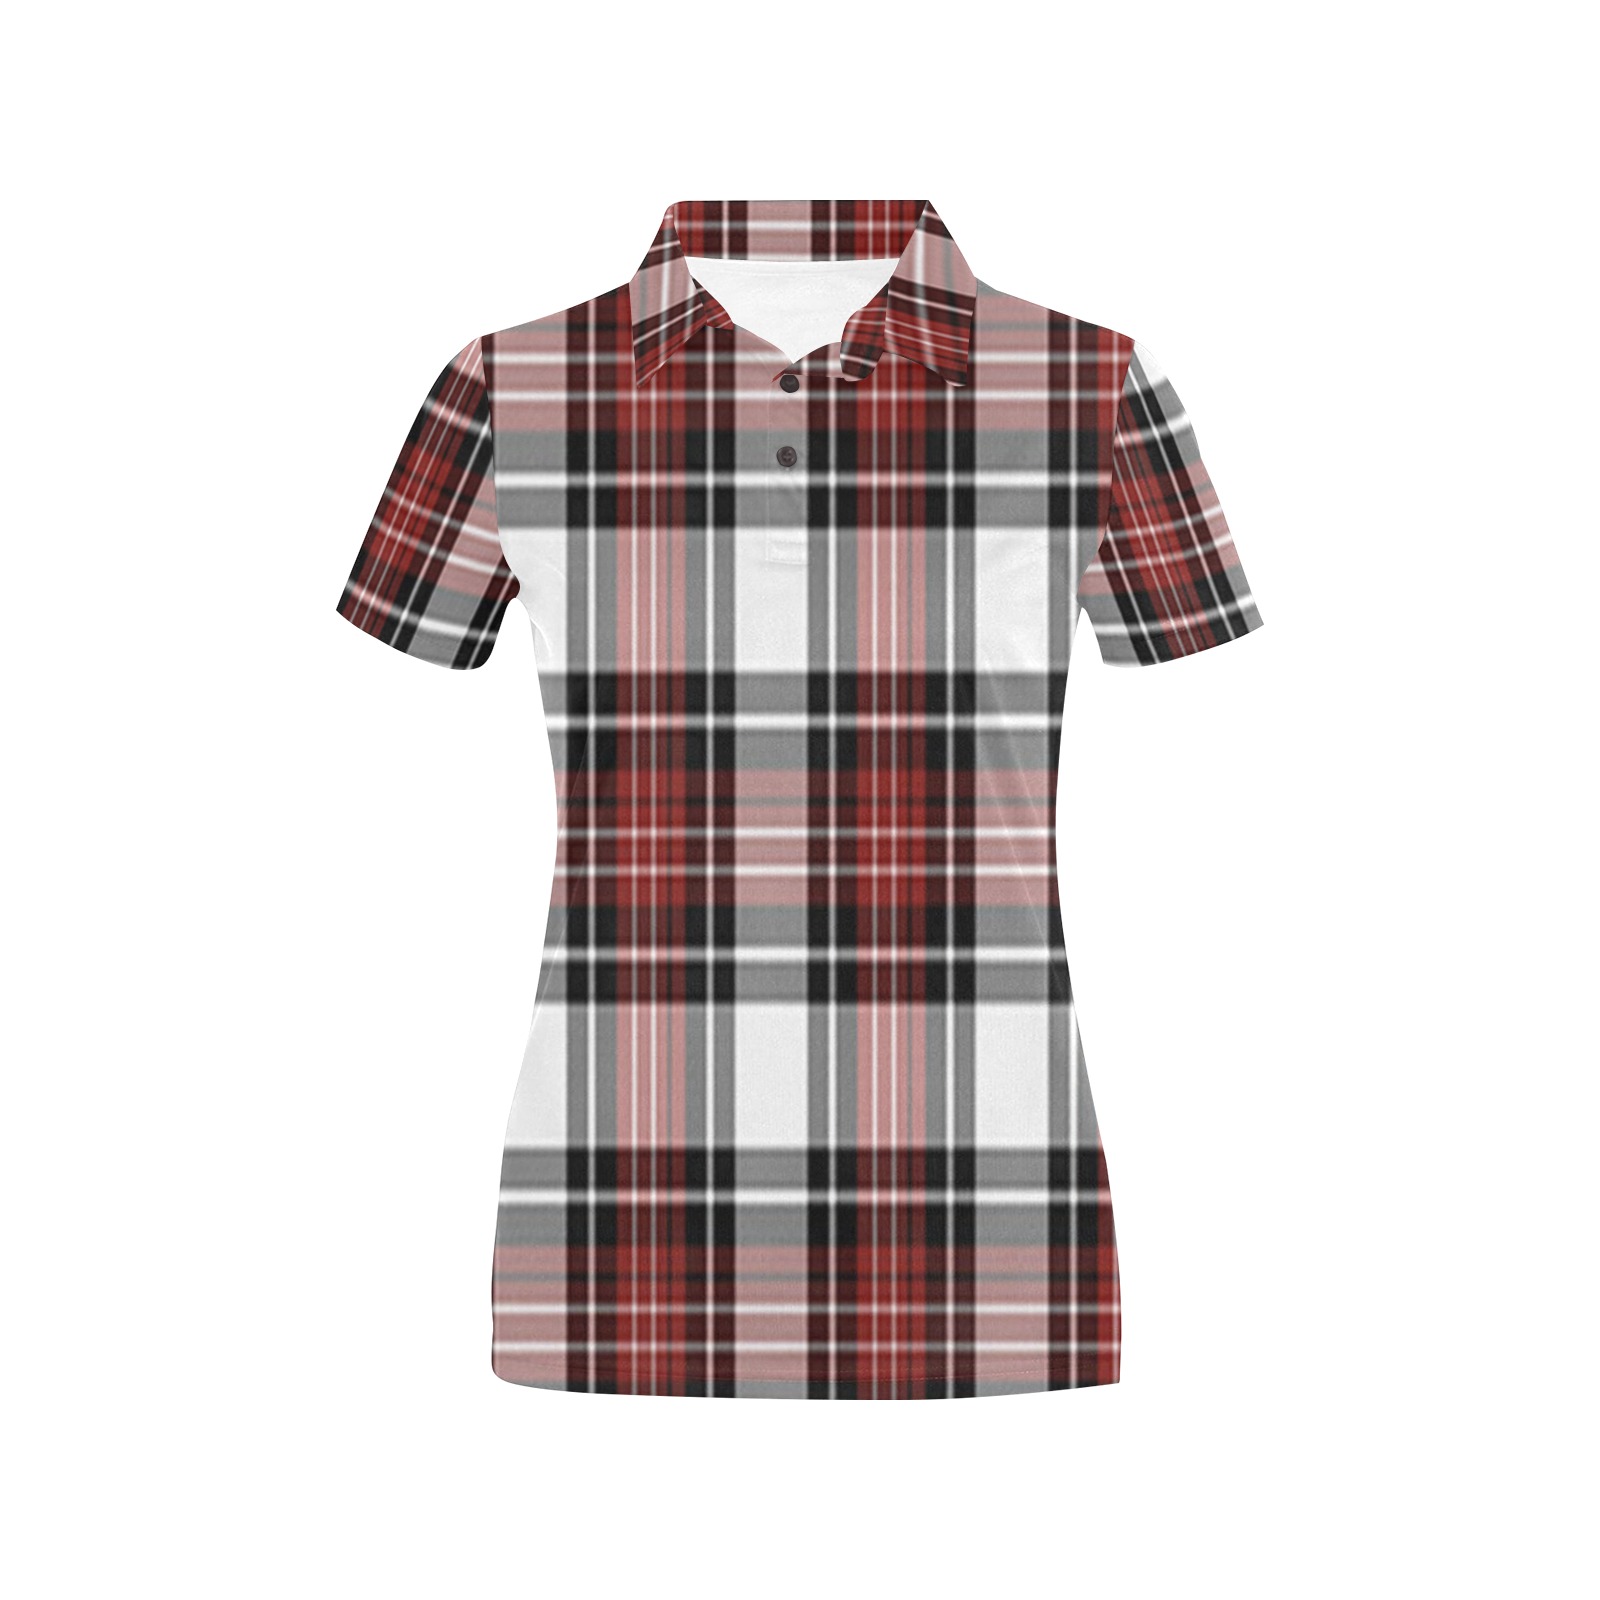 Red Black Plaid Women's All Over Print Polo Shirt (Model T55)